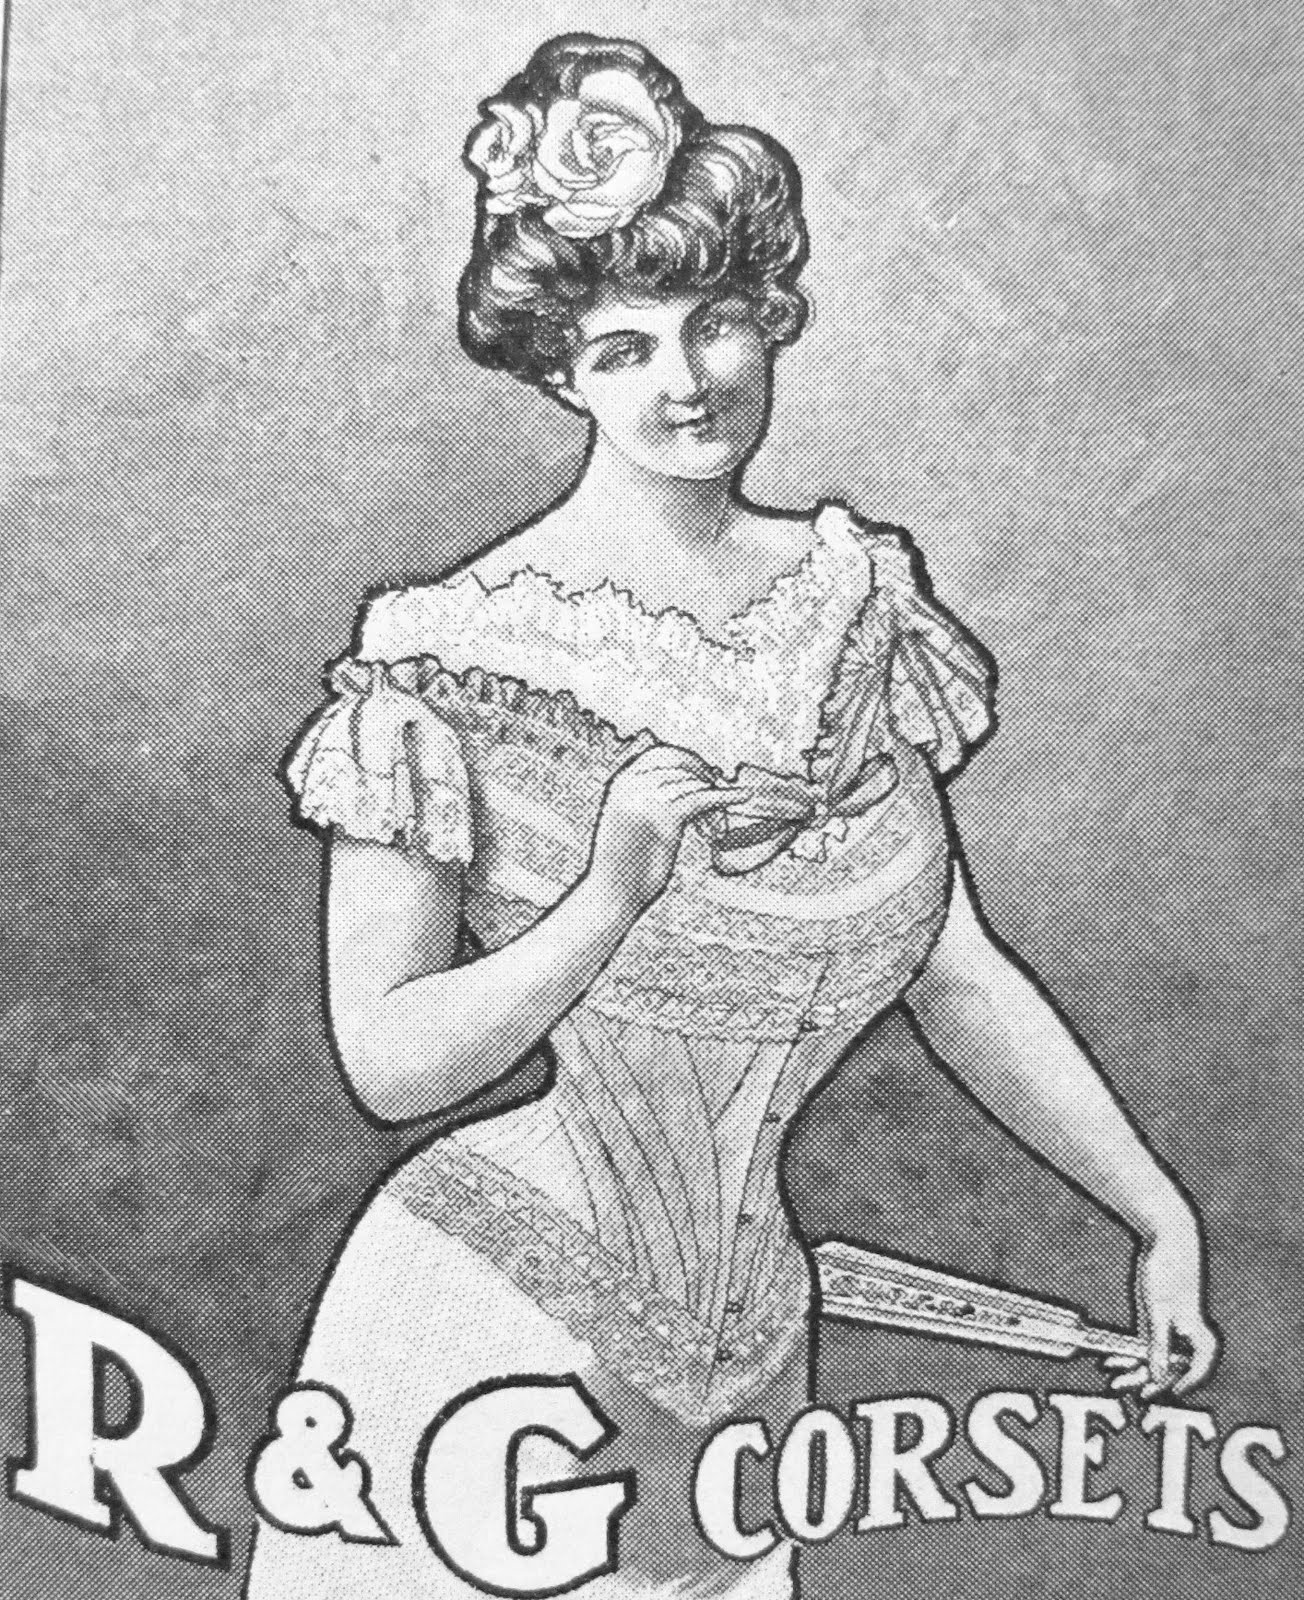 Pintucks: Edwardian Corsets, styles from 1900